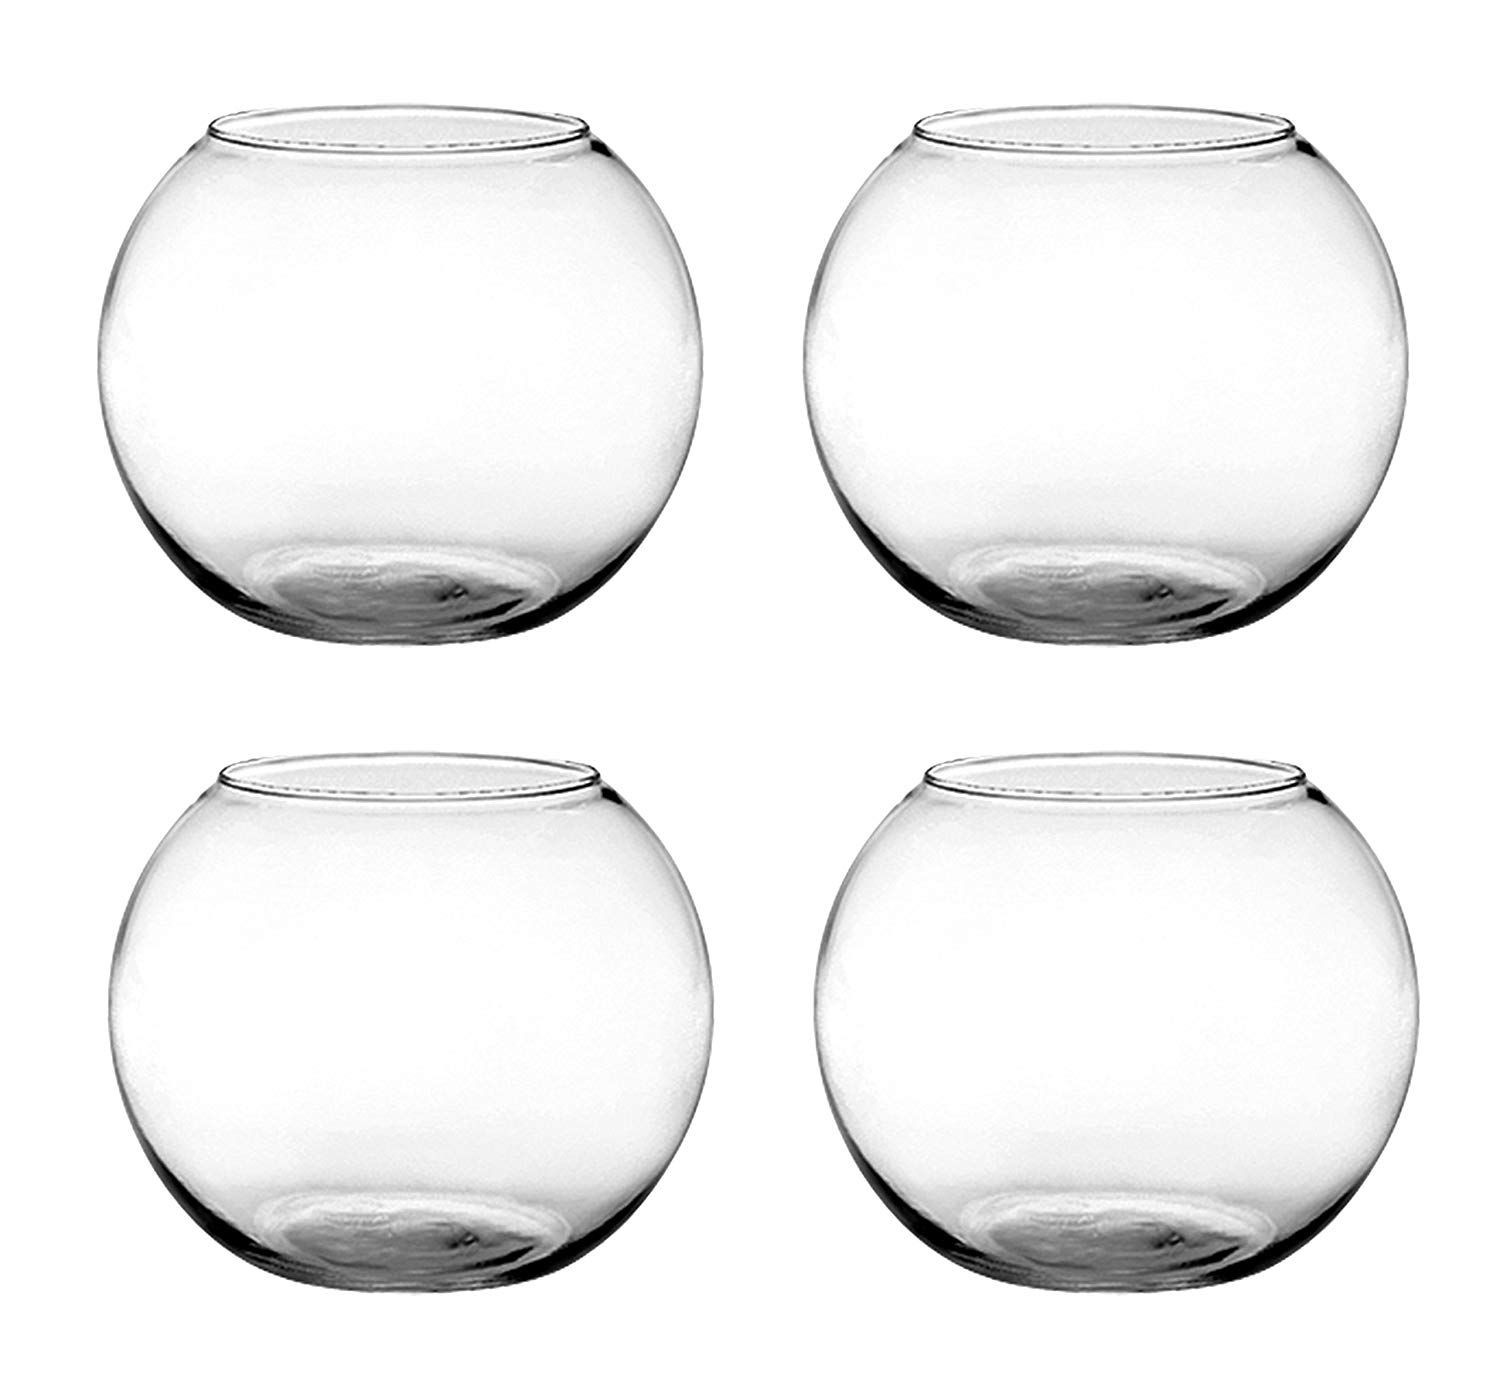 19 Elegant Clear Square Vase 2024 free download clear square vase of 32 wide mouth vase the weekly world regarding amazon syndicate sales 6 rose bowl clear planters garden